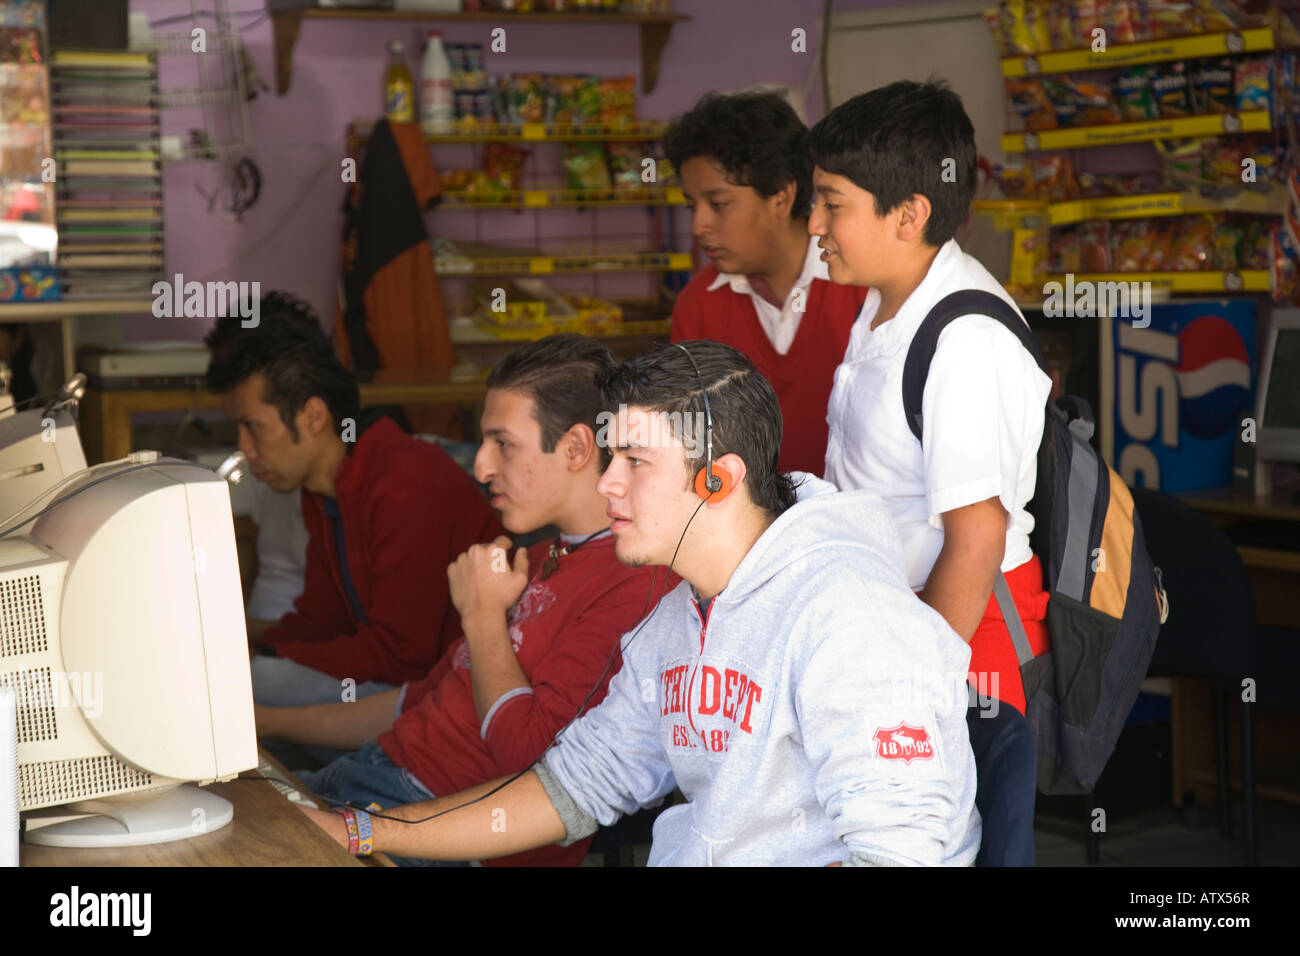 MEXICO Guanajuato Five Mexican boys and teens playing and watching computer games in corner grocery store Stock Photo